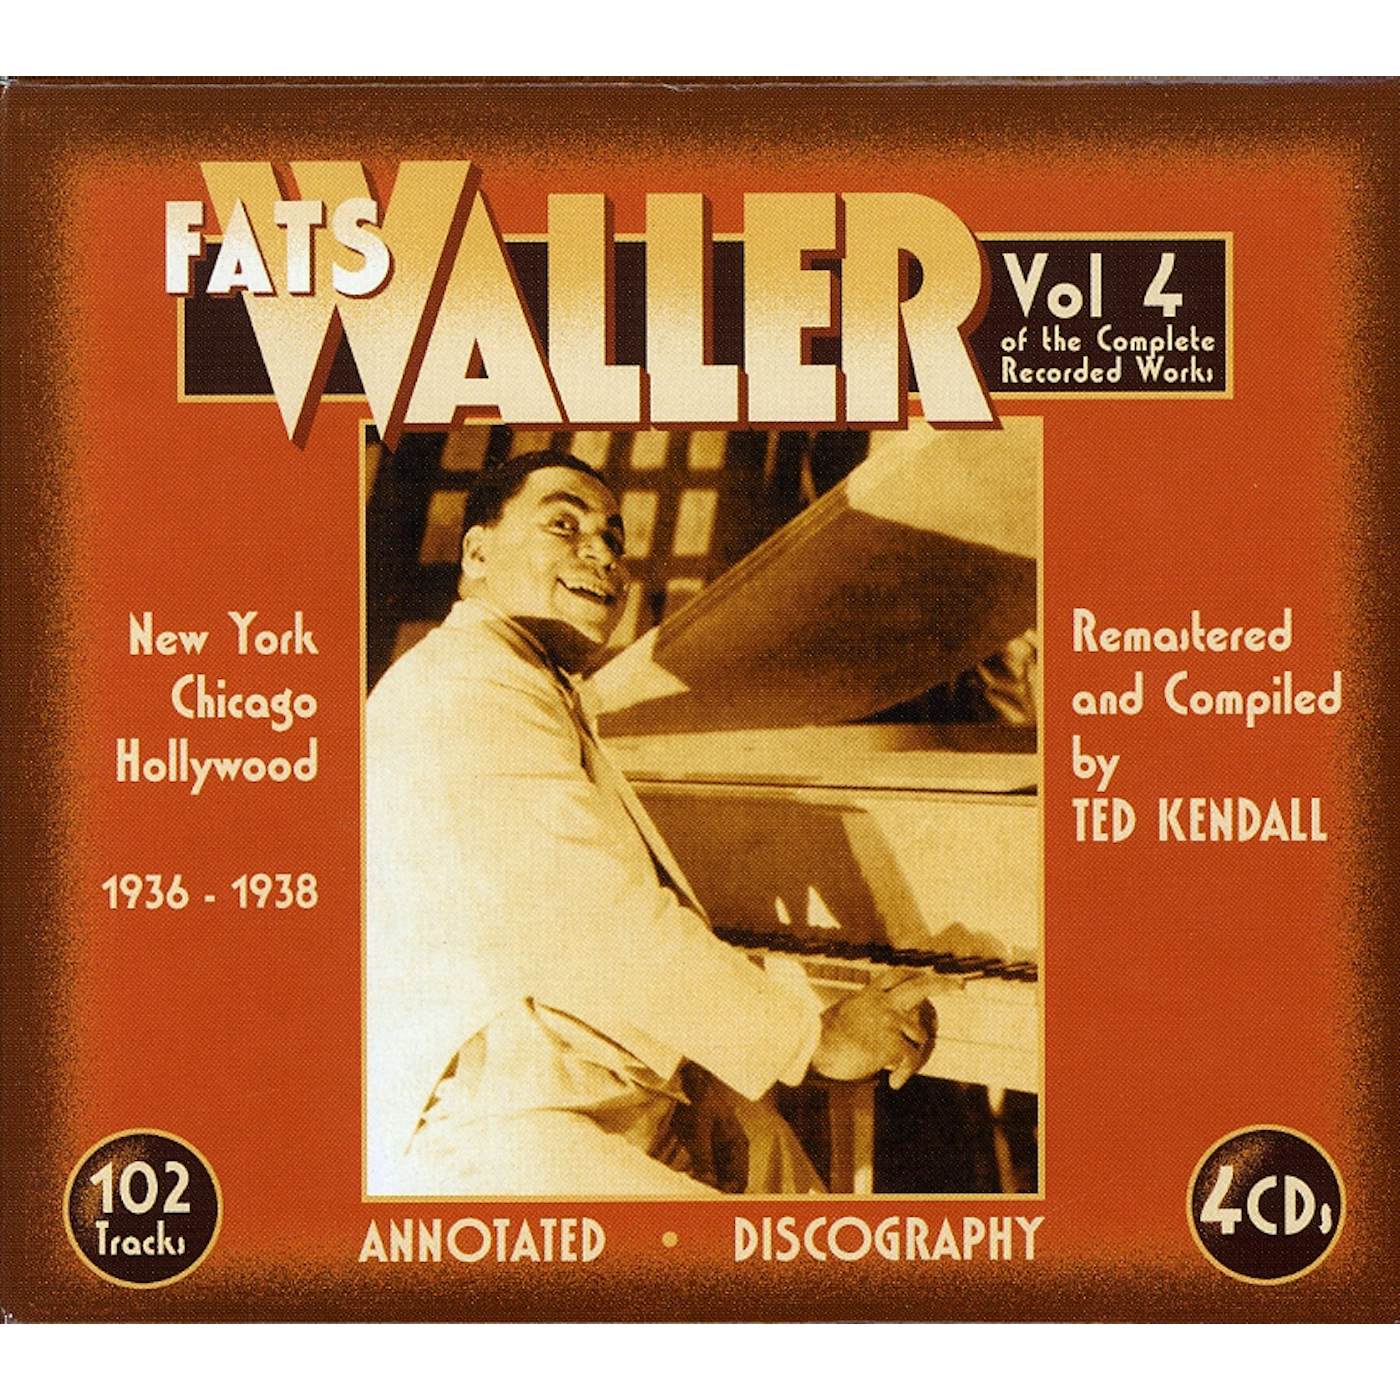 Fats Waller 4 OF THE COMPLETE RECORDED WORKS-1936-38 CD